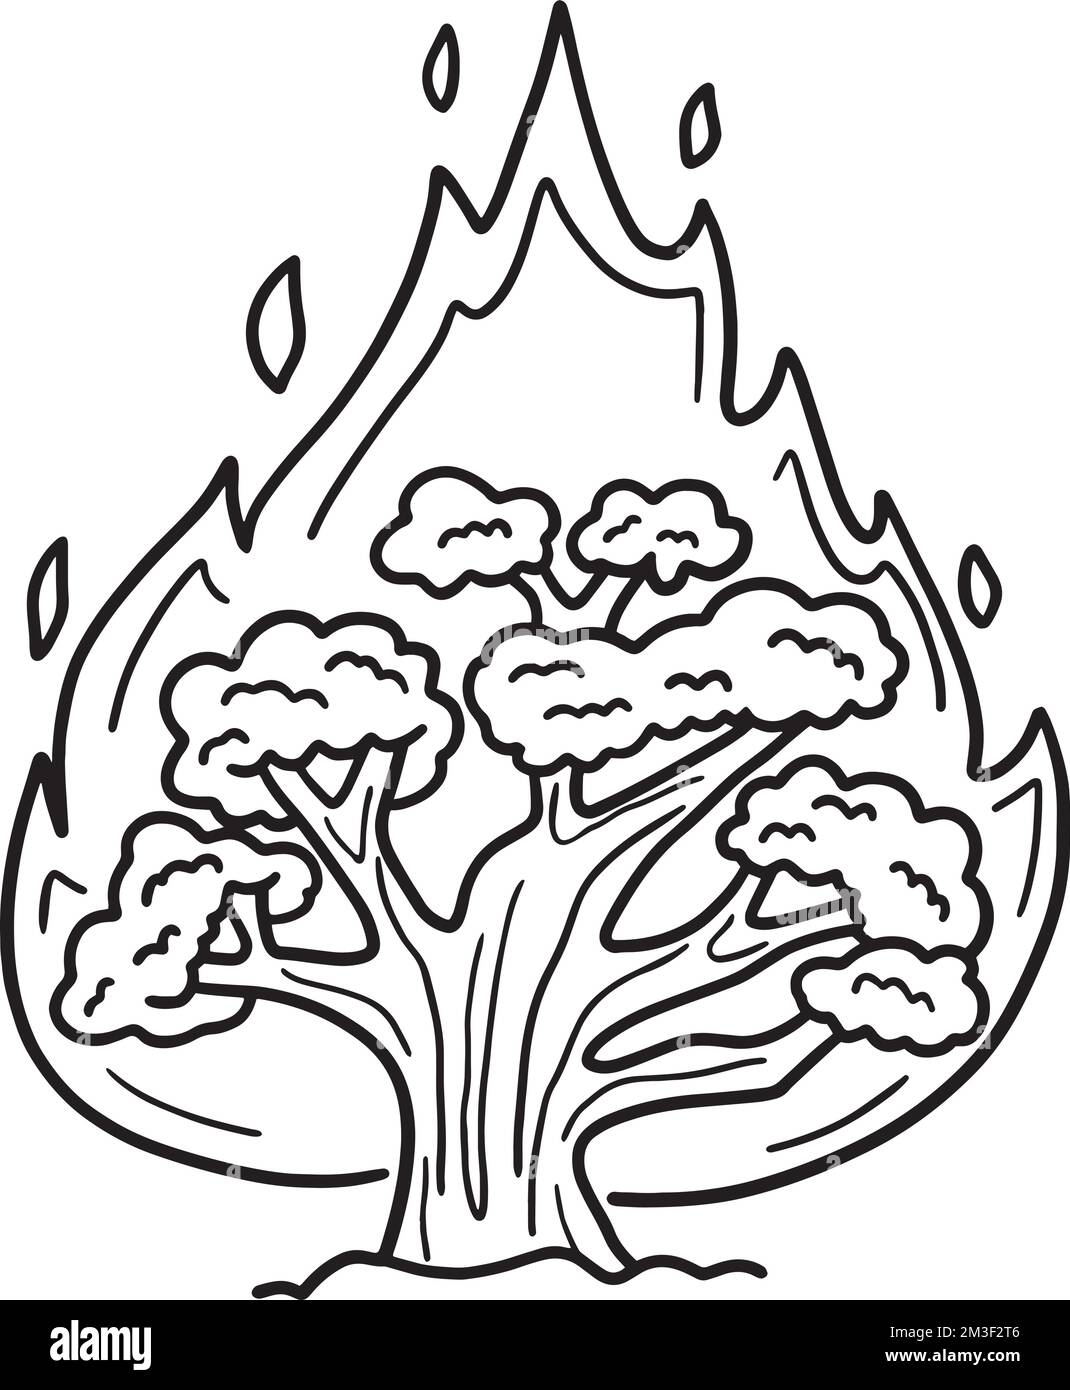 Christian Burning Bush Isolated Coloring Page  Stock Vector